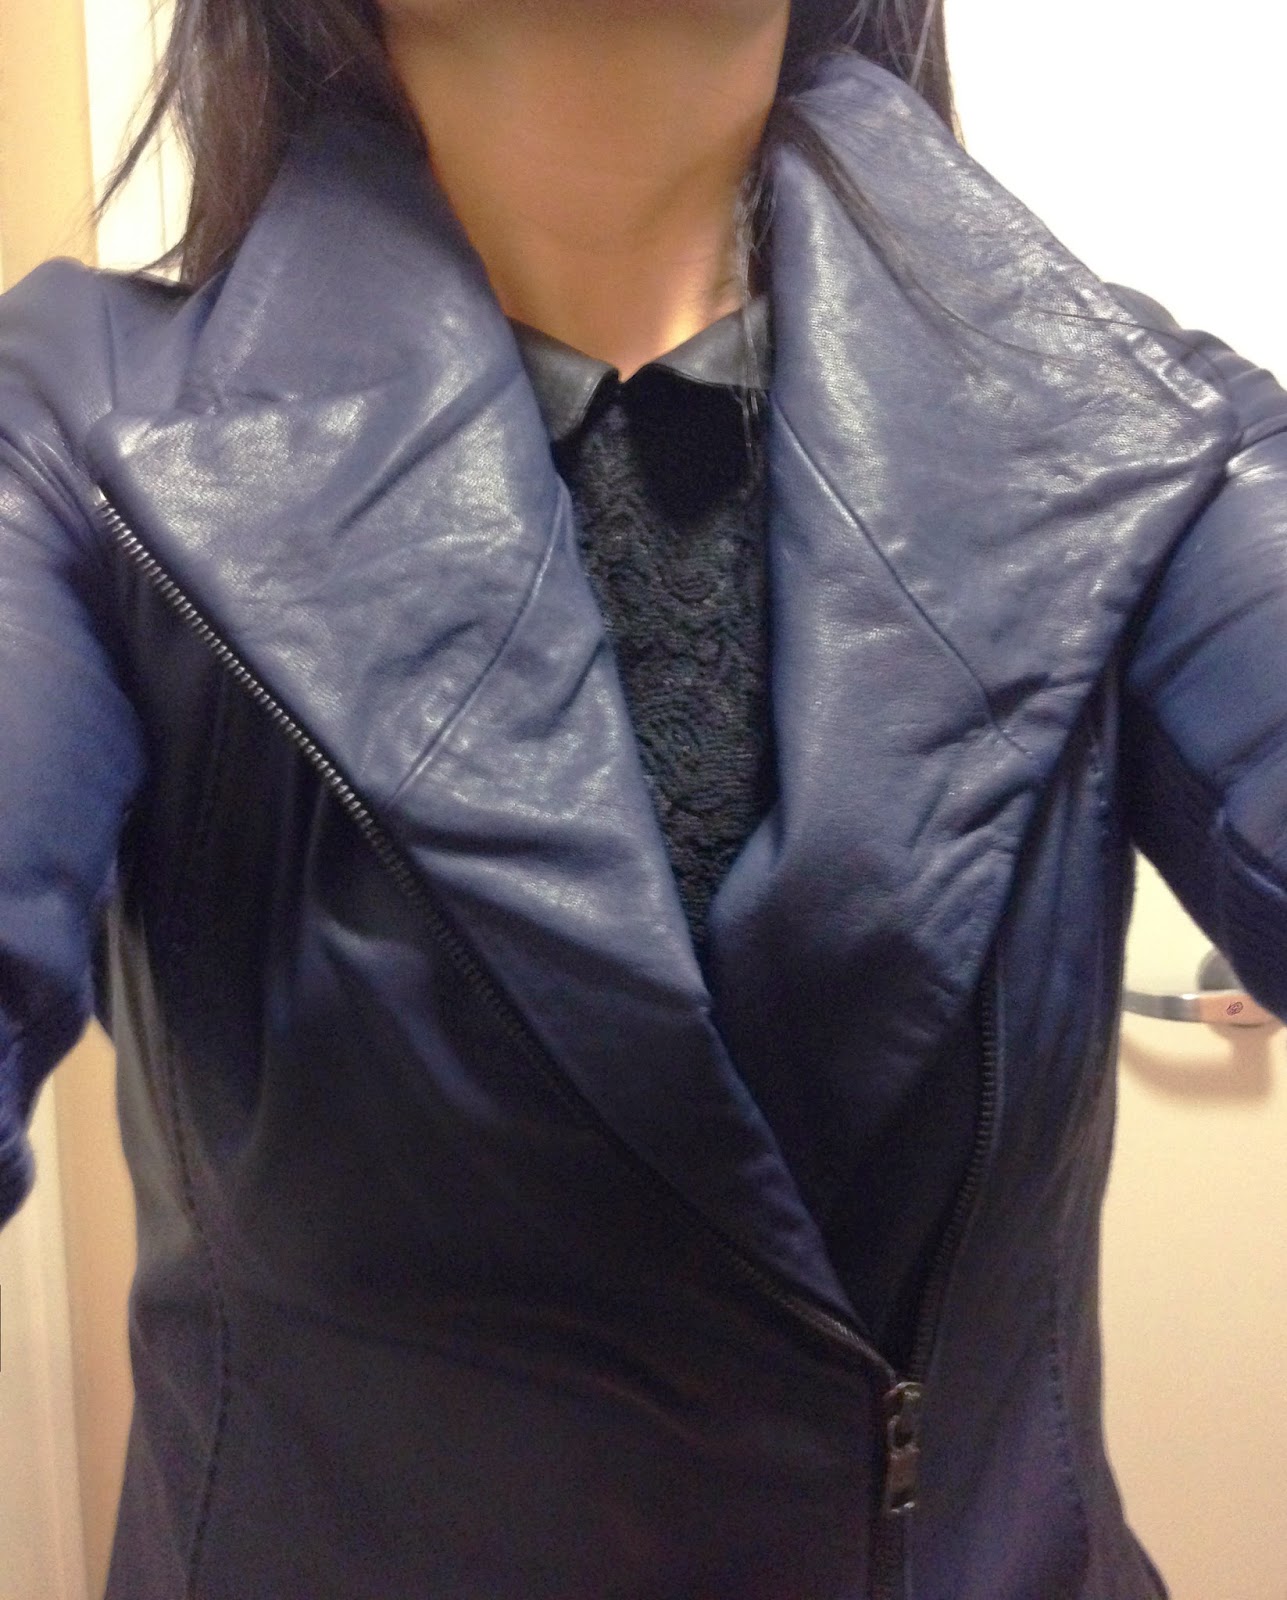 My Superficial Endeavors: 3rd Vince Leather Scuba Jacket - in Mallard!